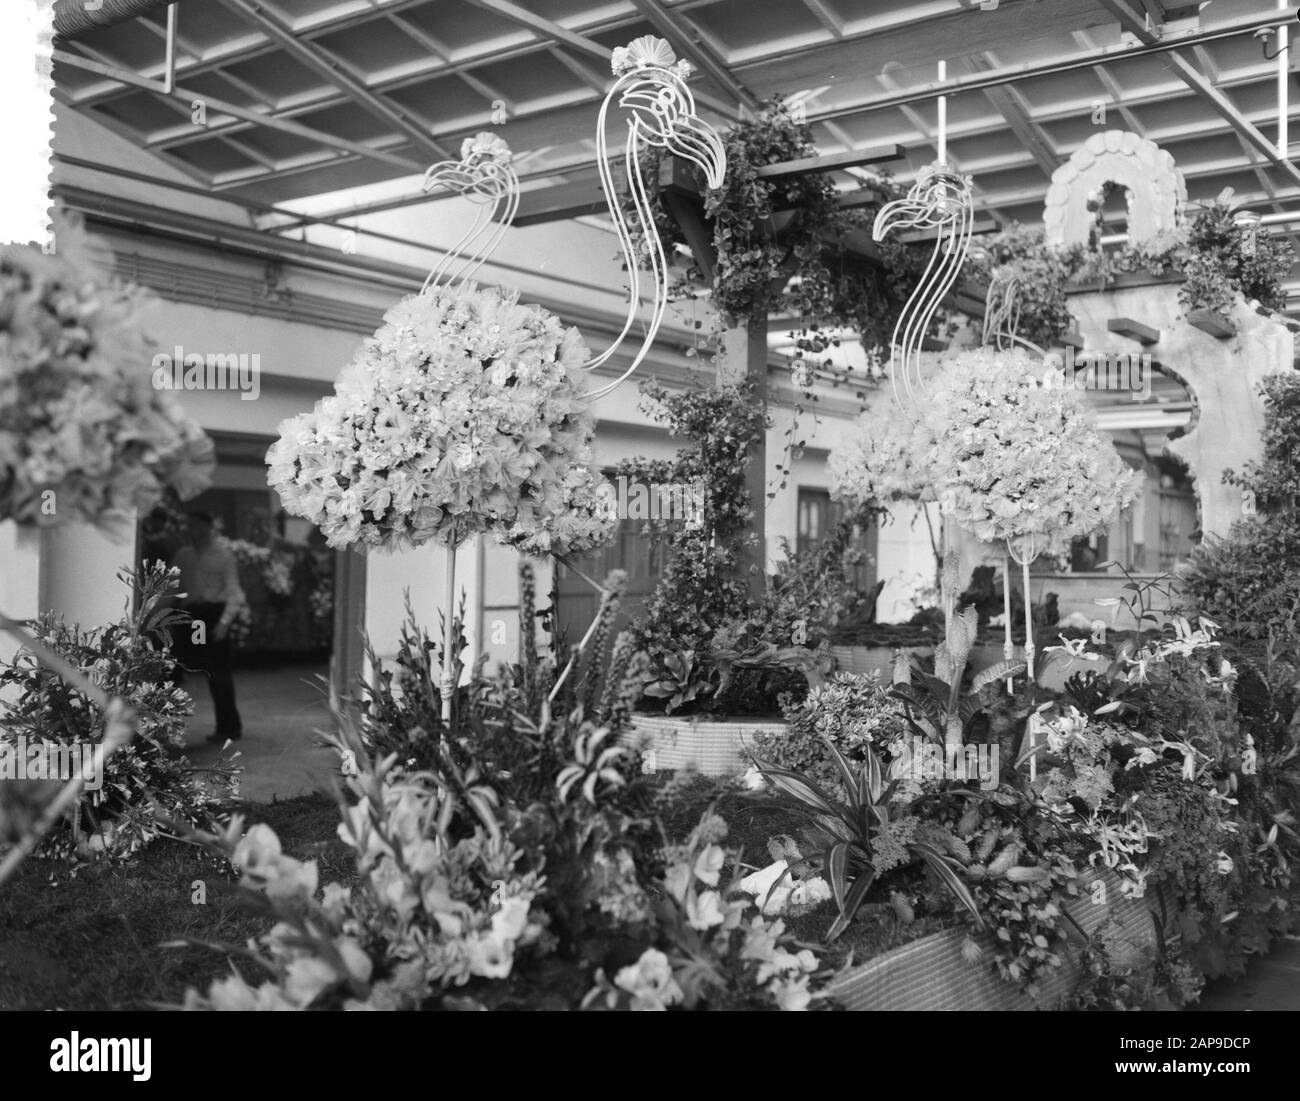 Belgian Day at Floriade, cars are adorned in the Aalsmeerder auction halls for the flower show Date: September 2, 1960 Keywords: FROWERLCORSOS, WARKS, auction halls Personal name: Flower corso Institution name: Floriade Stock Photo